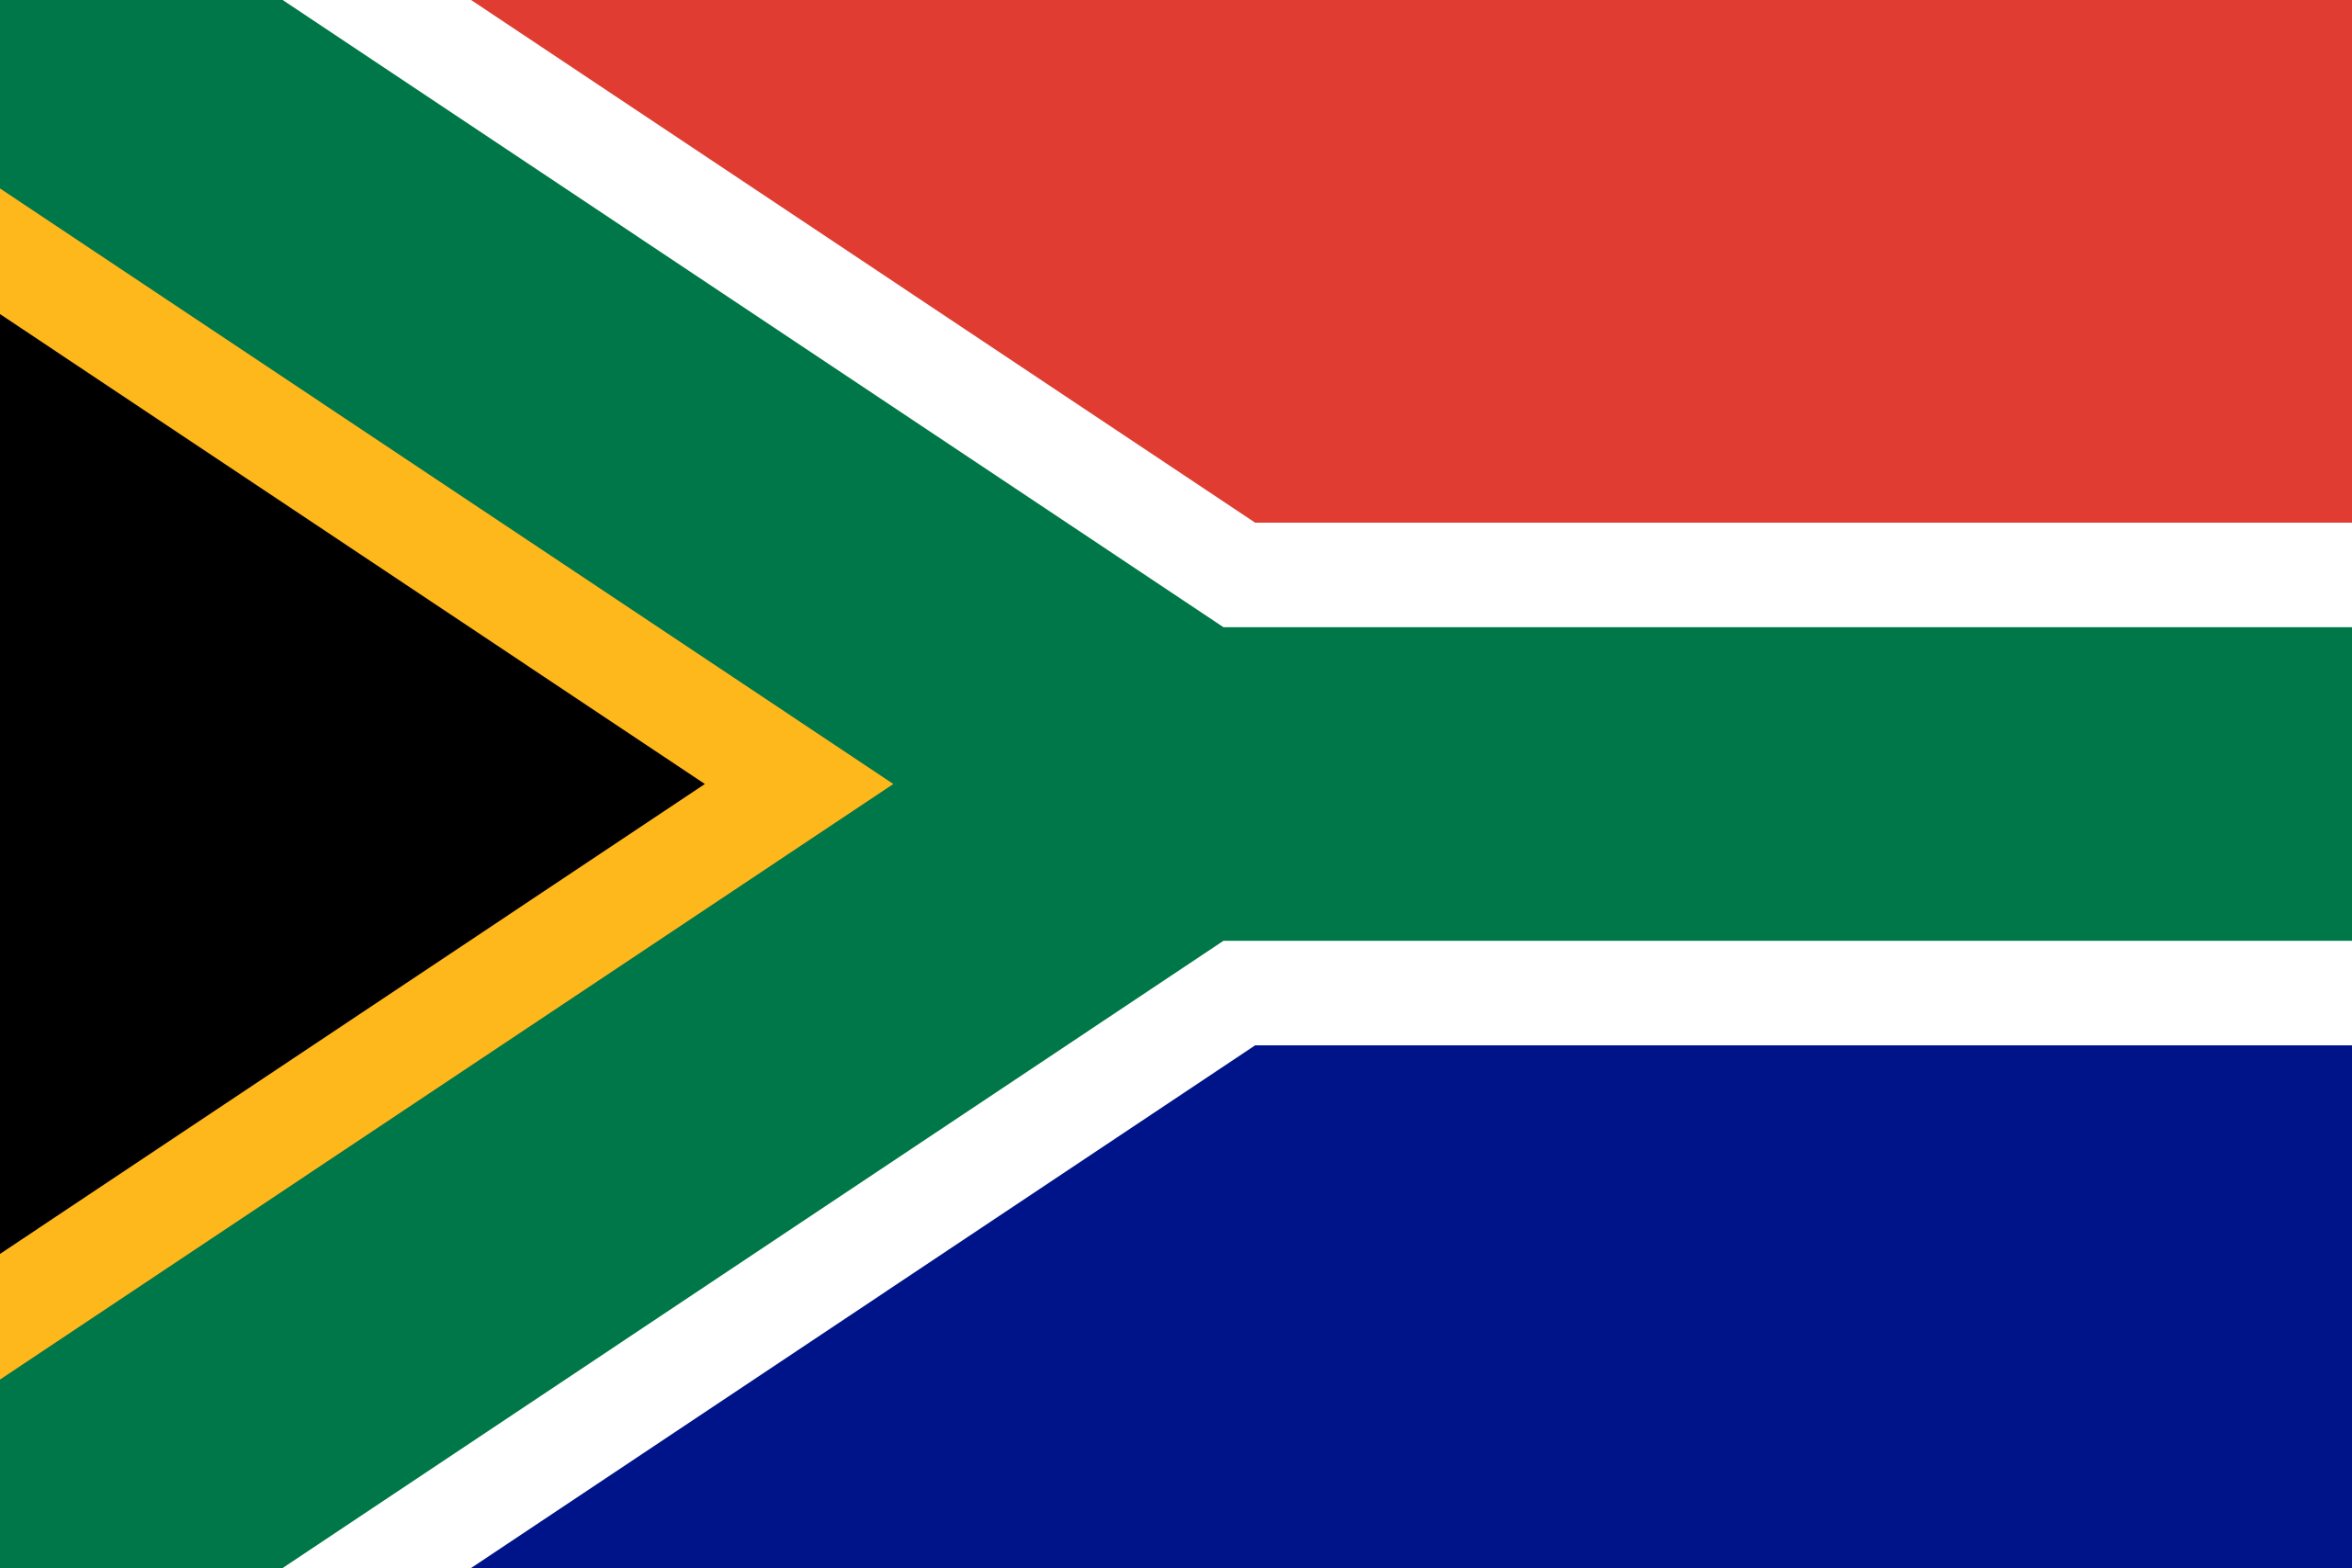 File:Flag of South Africa.svg - Wikipedia